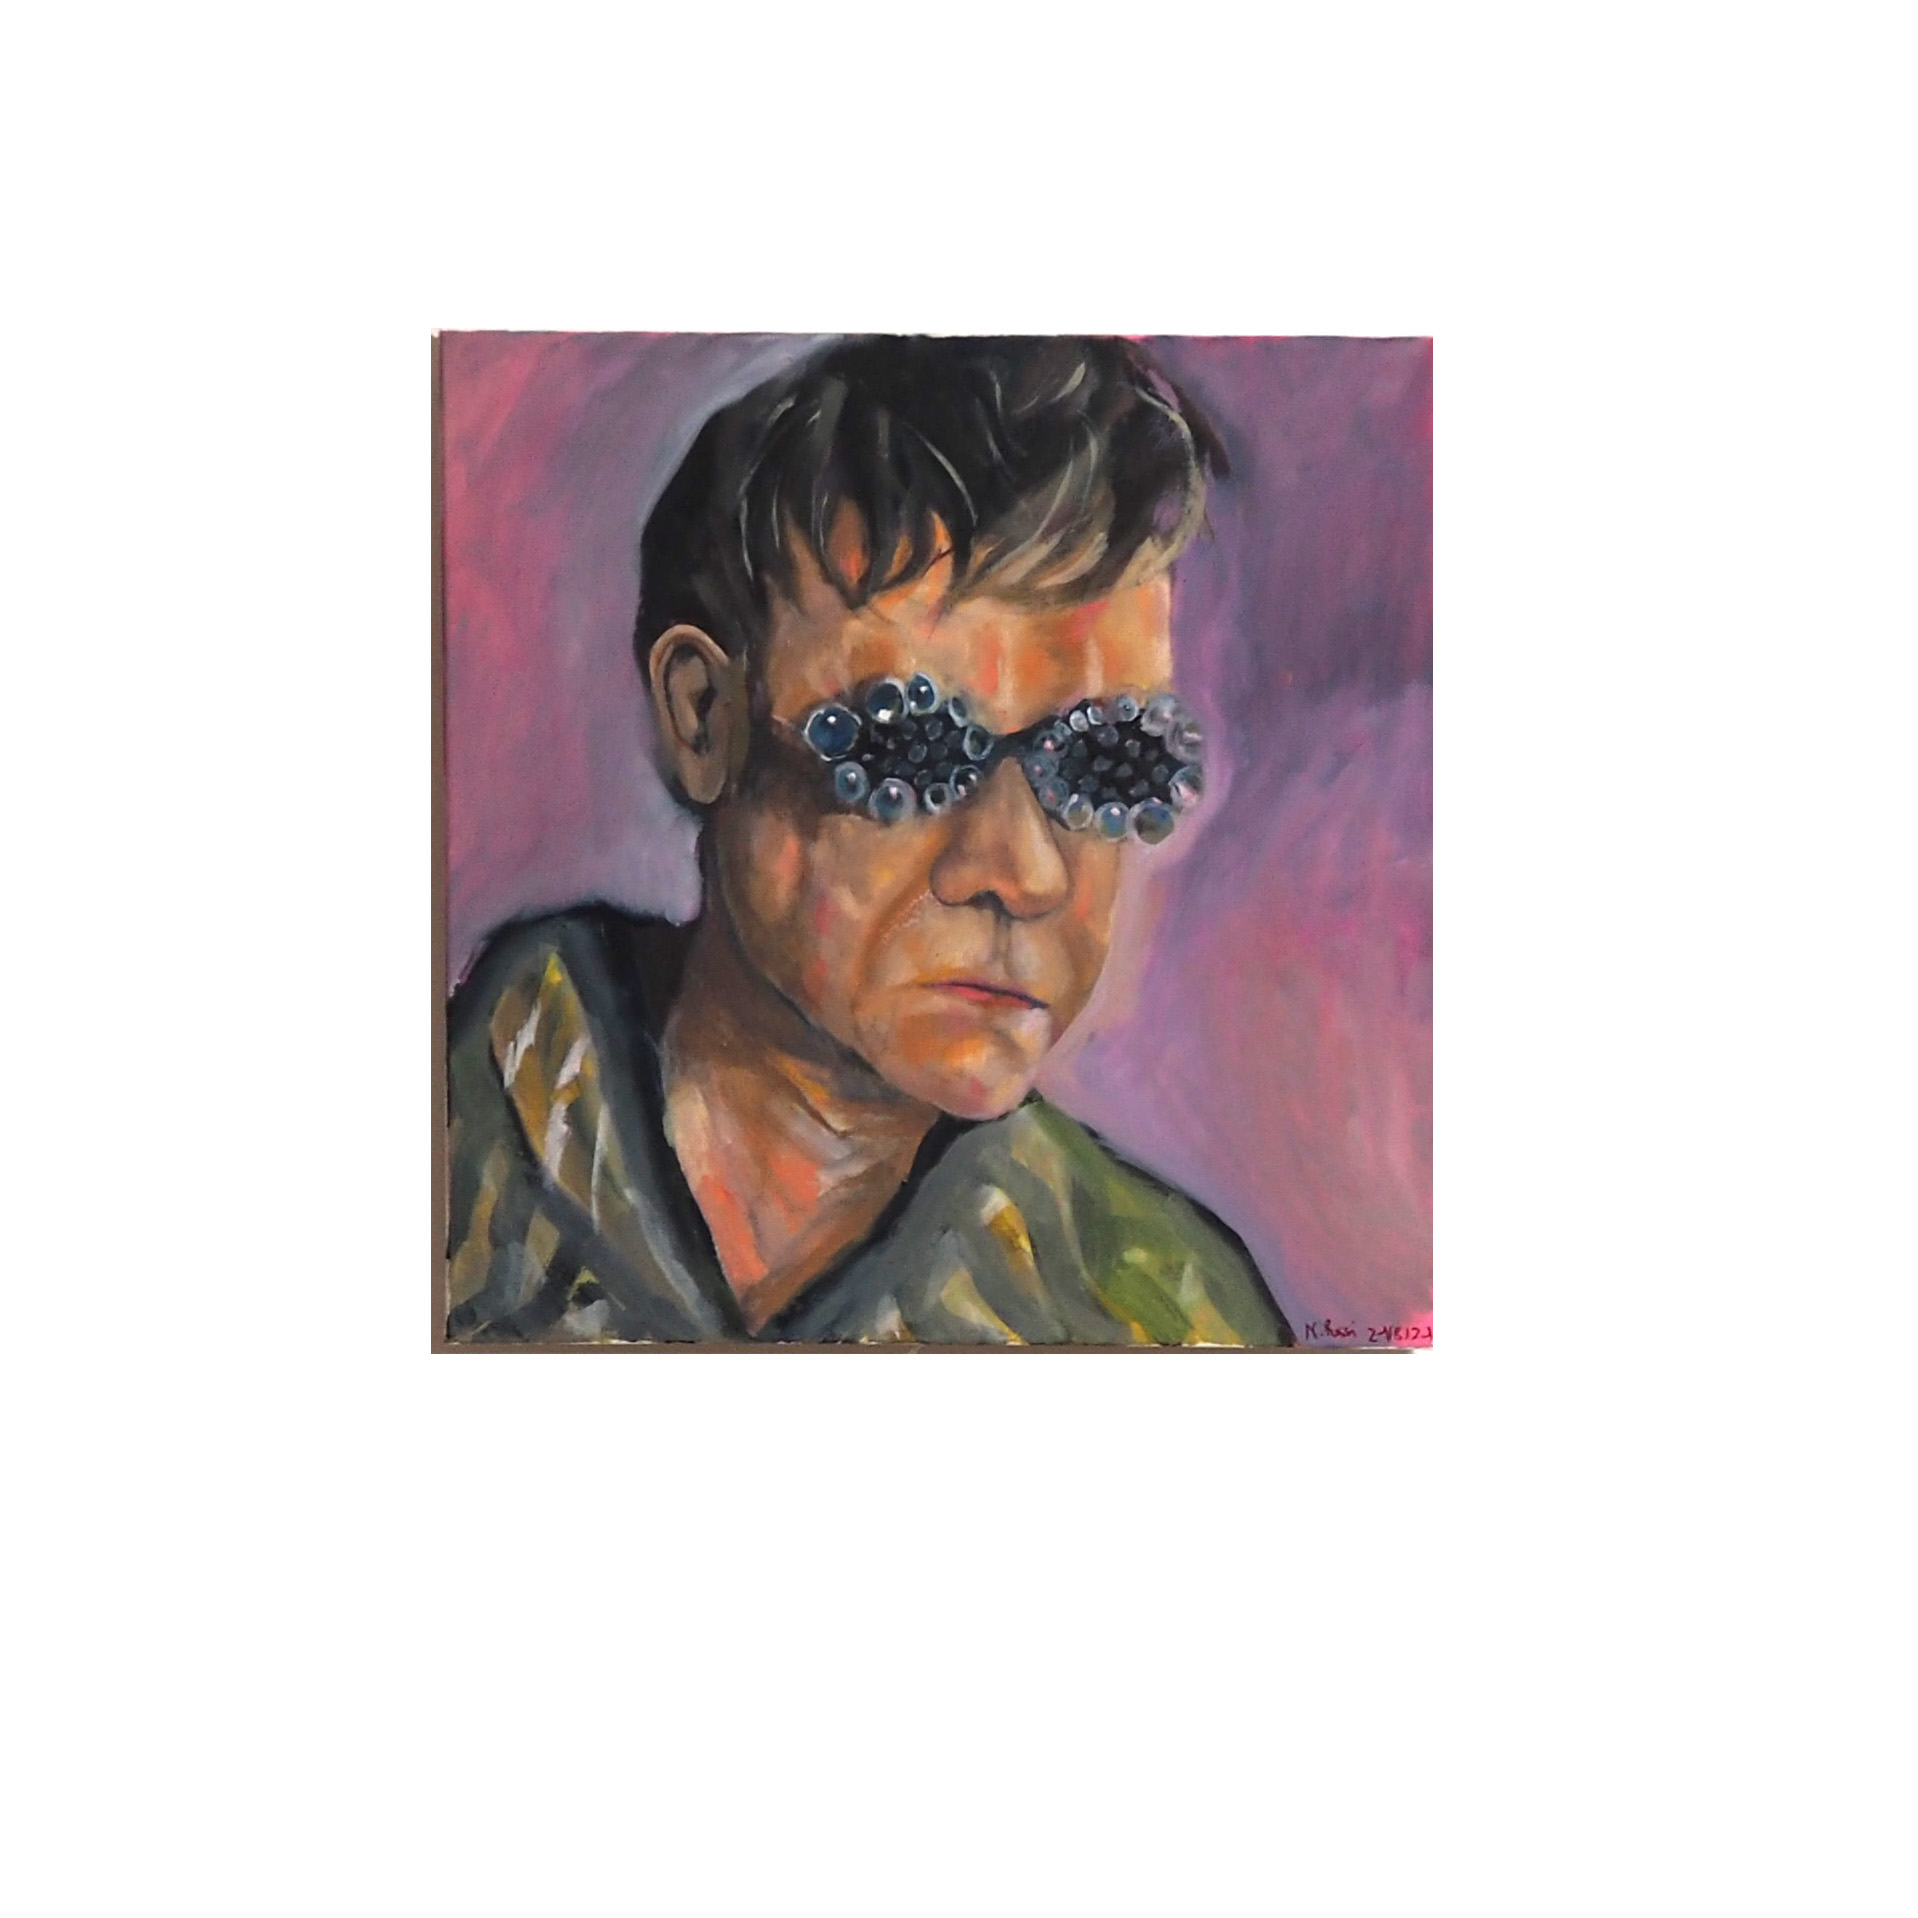 Painting 'Elton' by Artist Nikita Russi, representing Elton John in the good old times